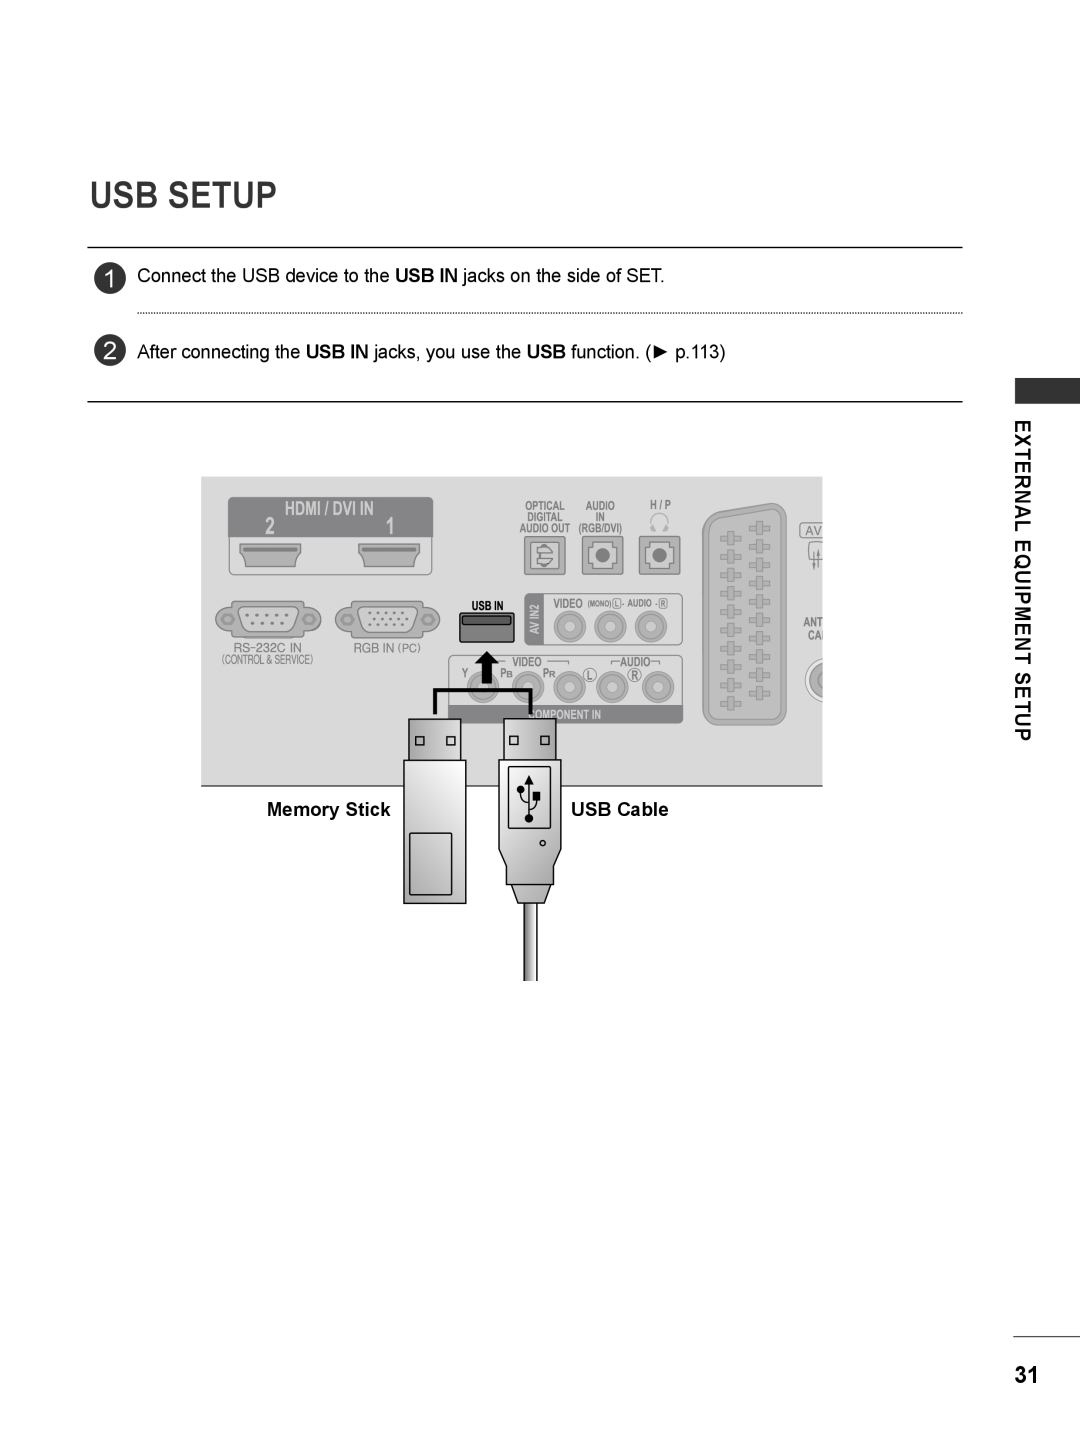 LG Electronics M2780DN Usb Setup, Connect the USB device to the USB IN jacks on the side of SET, External Equipment Setup 